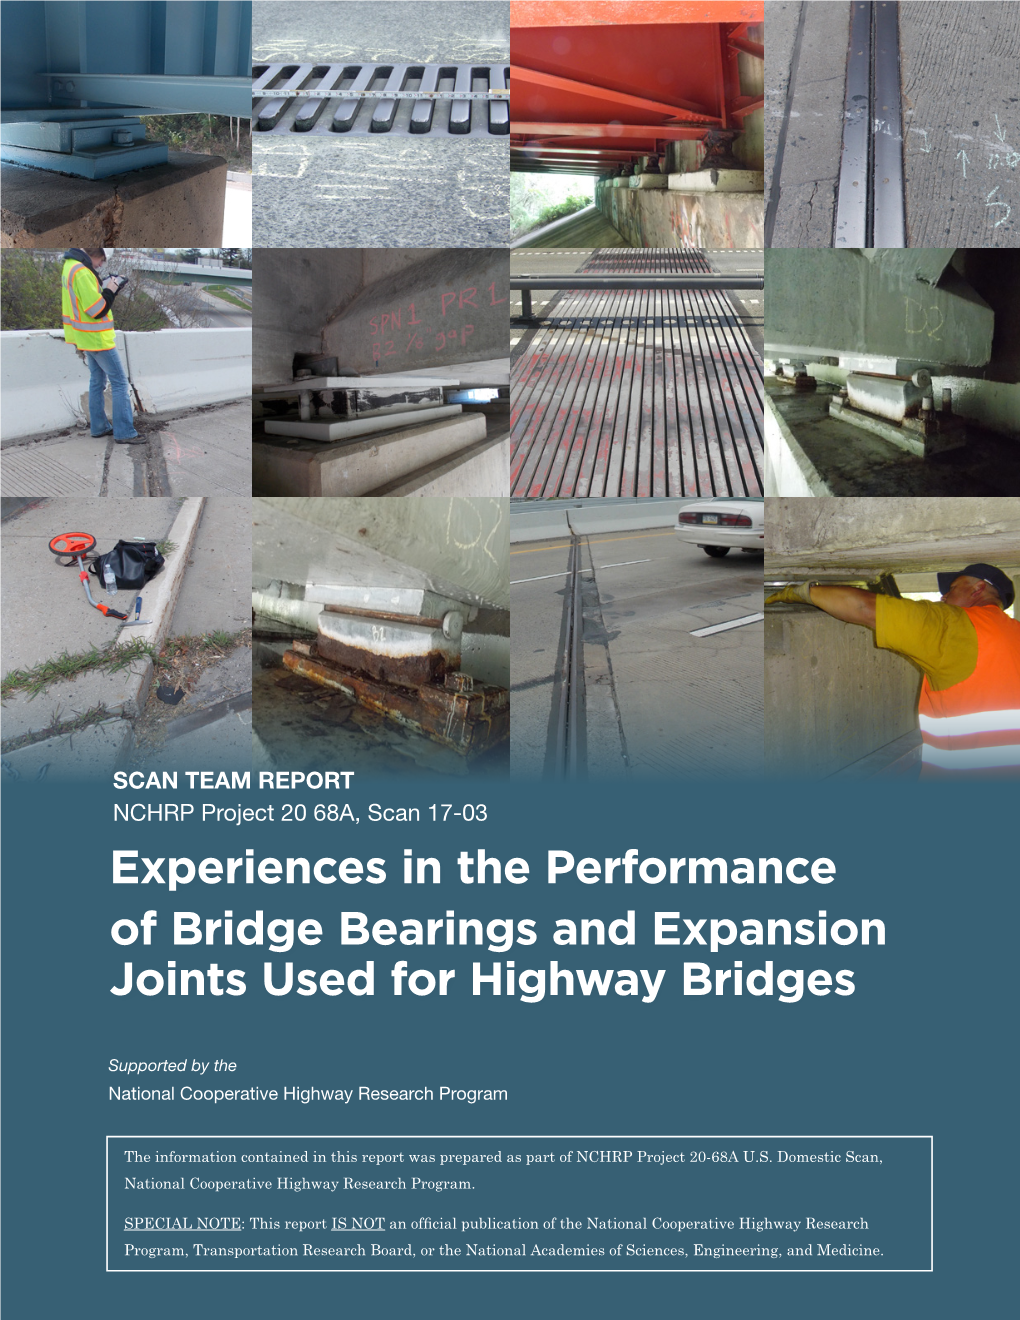 Experiences in the Performance of Bridge Bearings and Expansion Joints Used for Highway Bridges